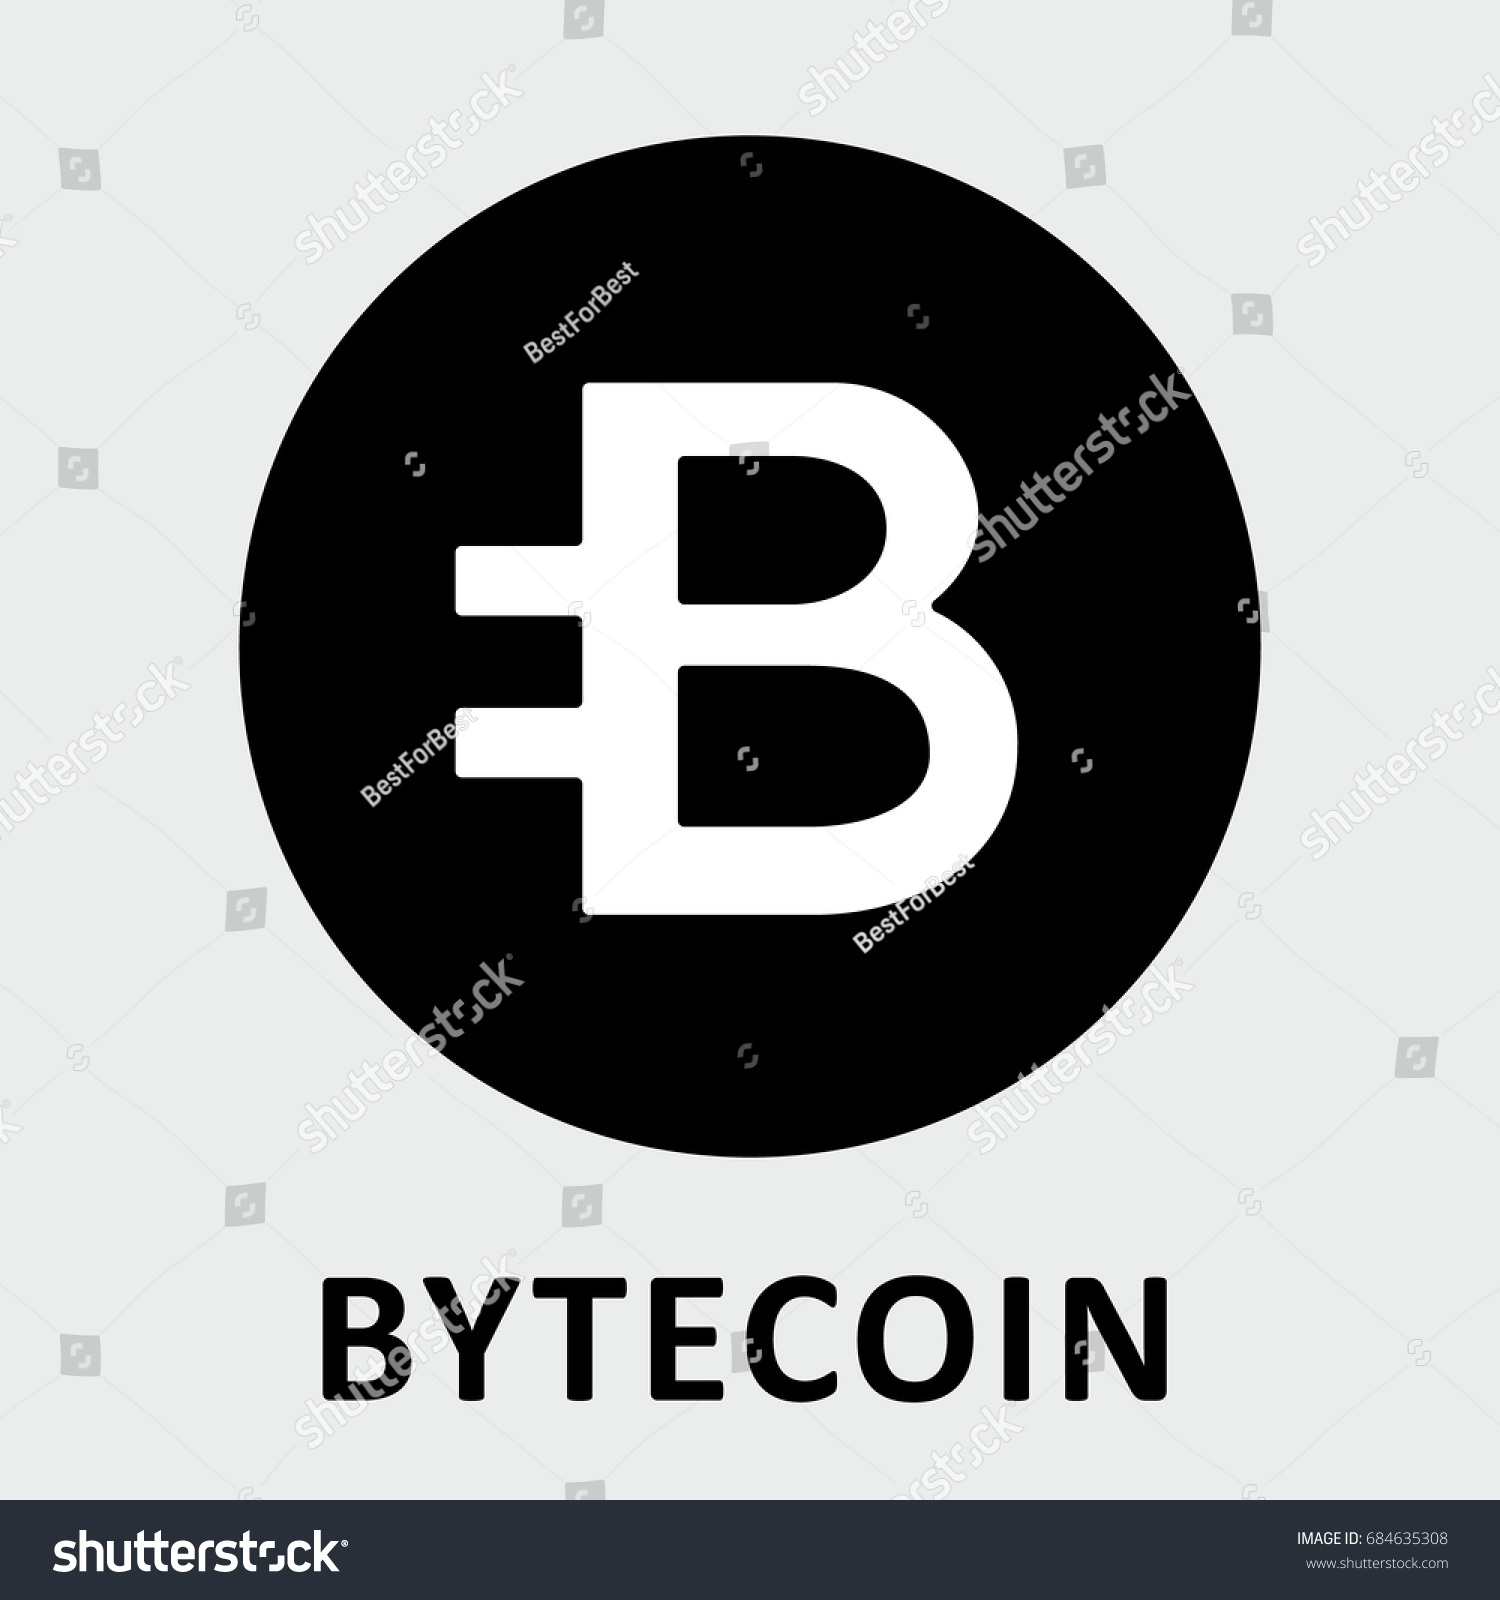 SVG of Bytecoin (BCN) crypto currency black and white icon for apps and websites. svg